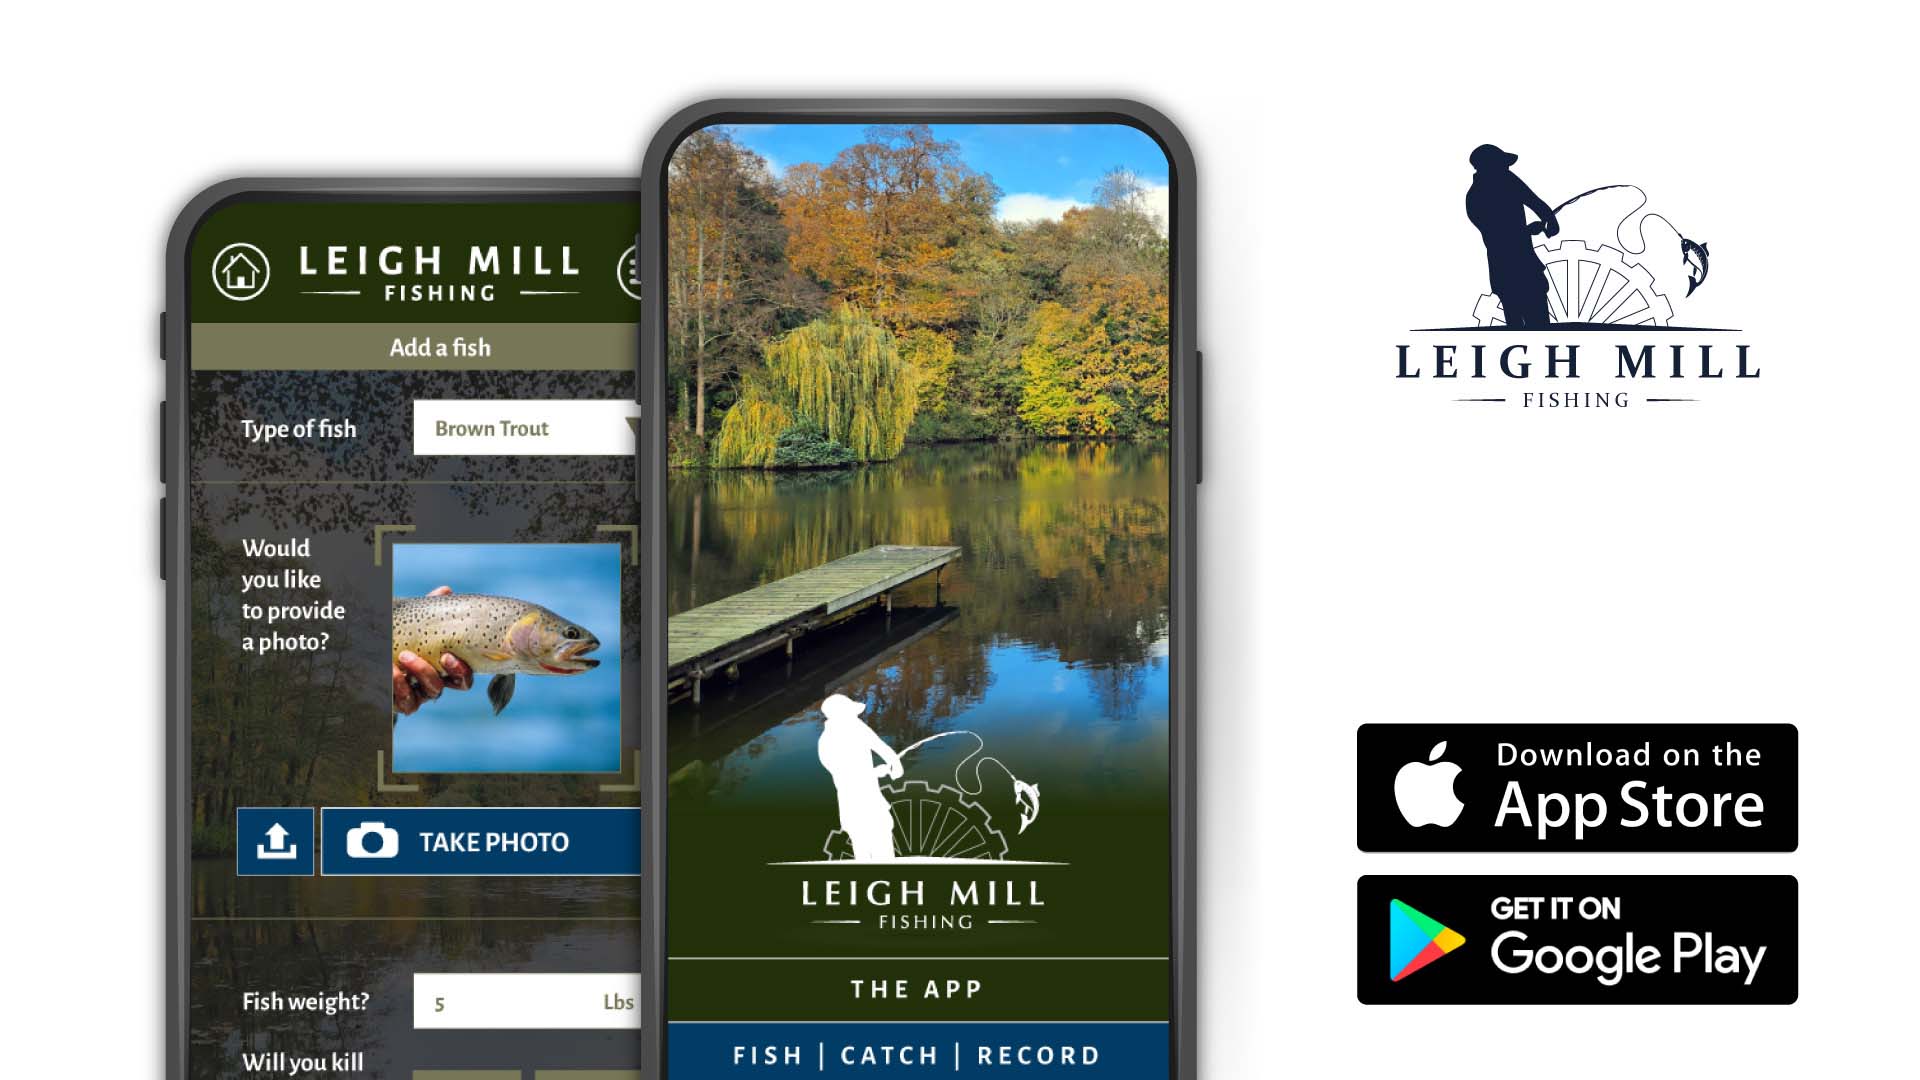 The Leigh Mill Fishing App brought to you by Identity Pixel - App Design & Development in Essex